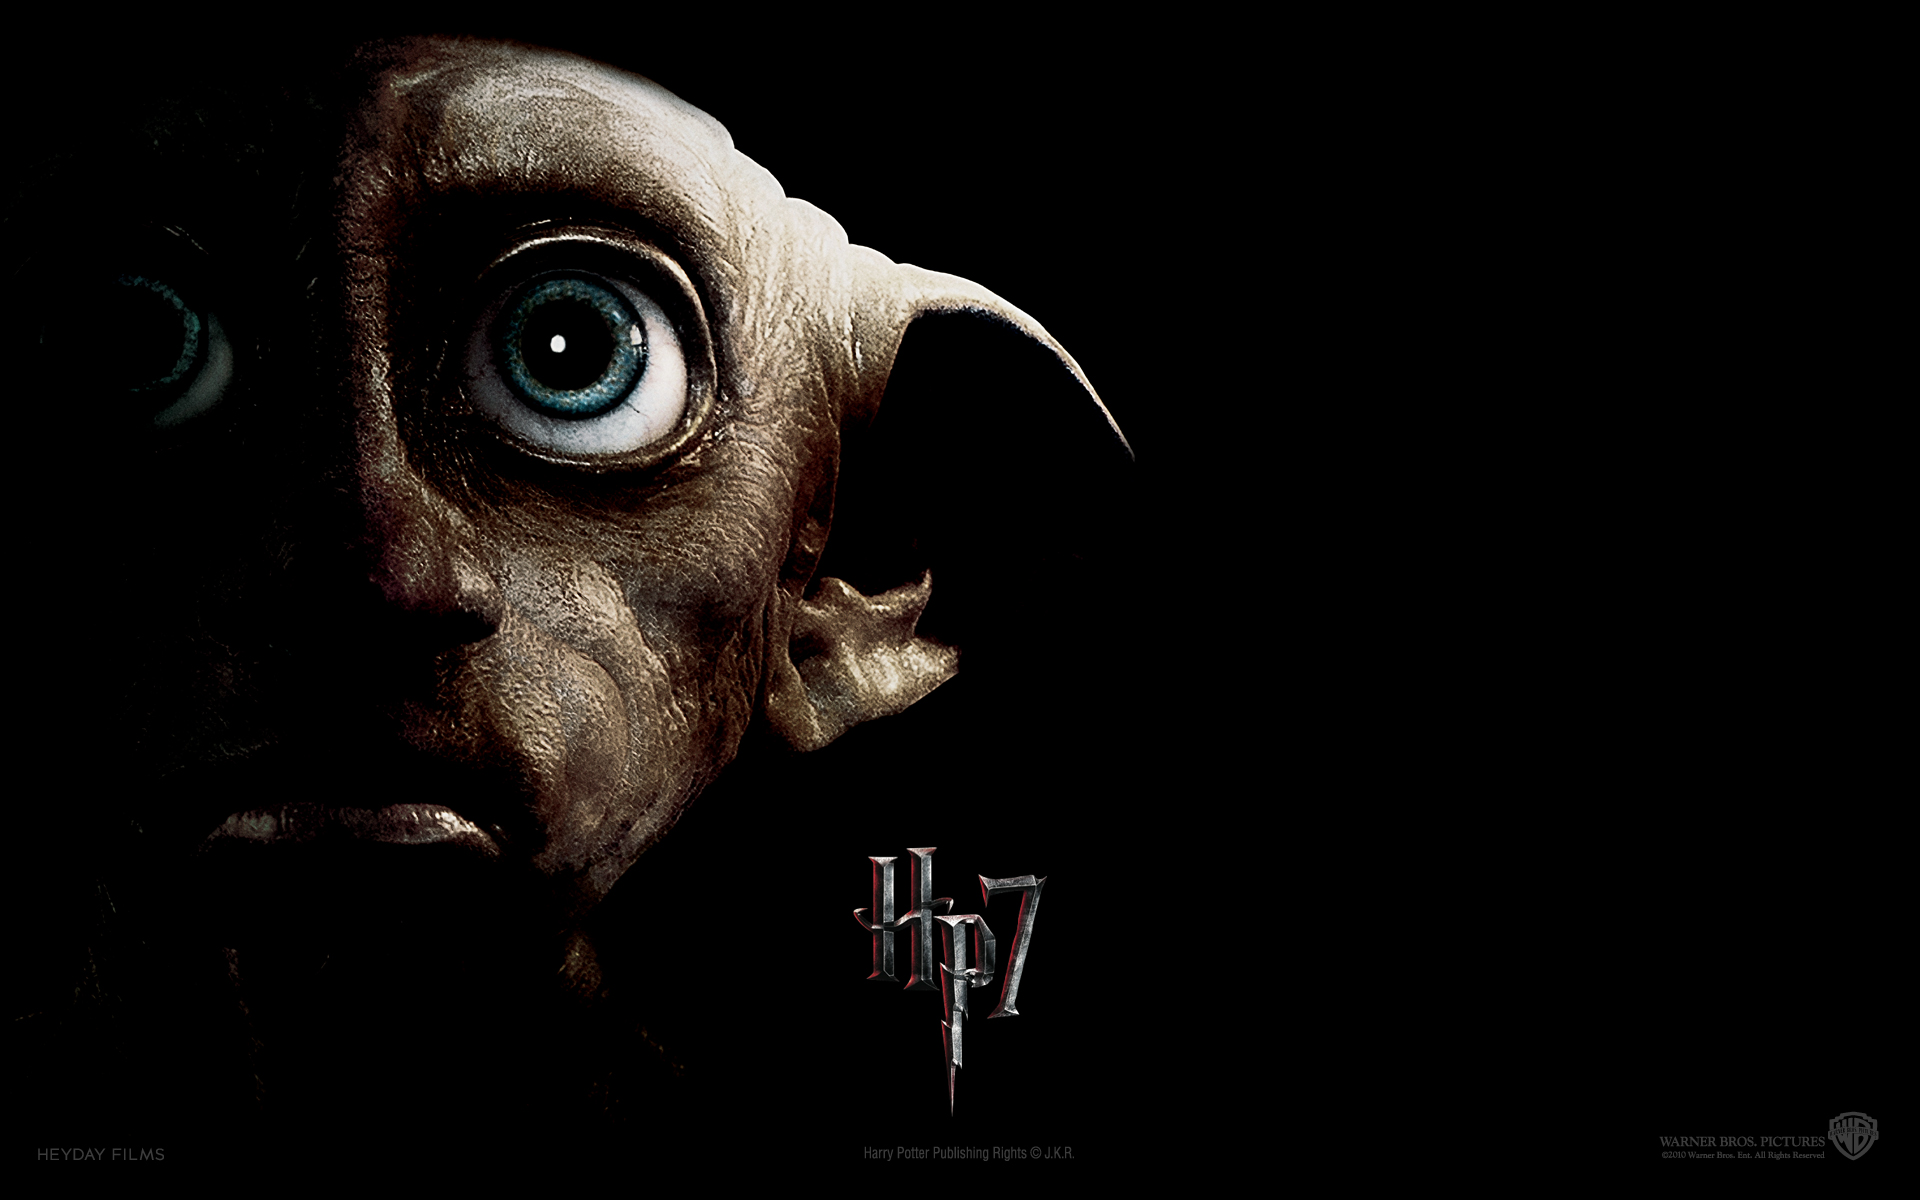 Harry Potter character Dobby from Deathly Hallows. Colorful HD desktop wallpaper.